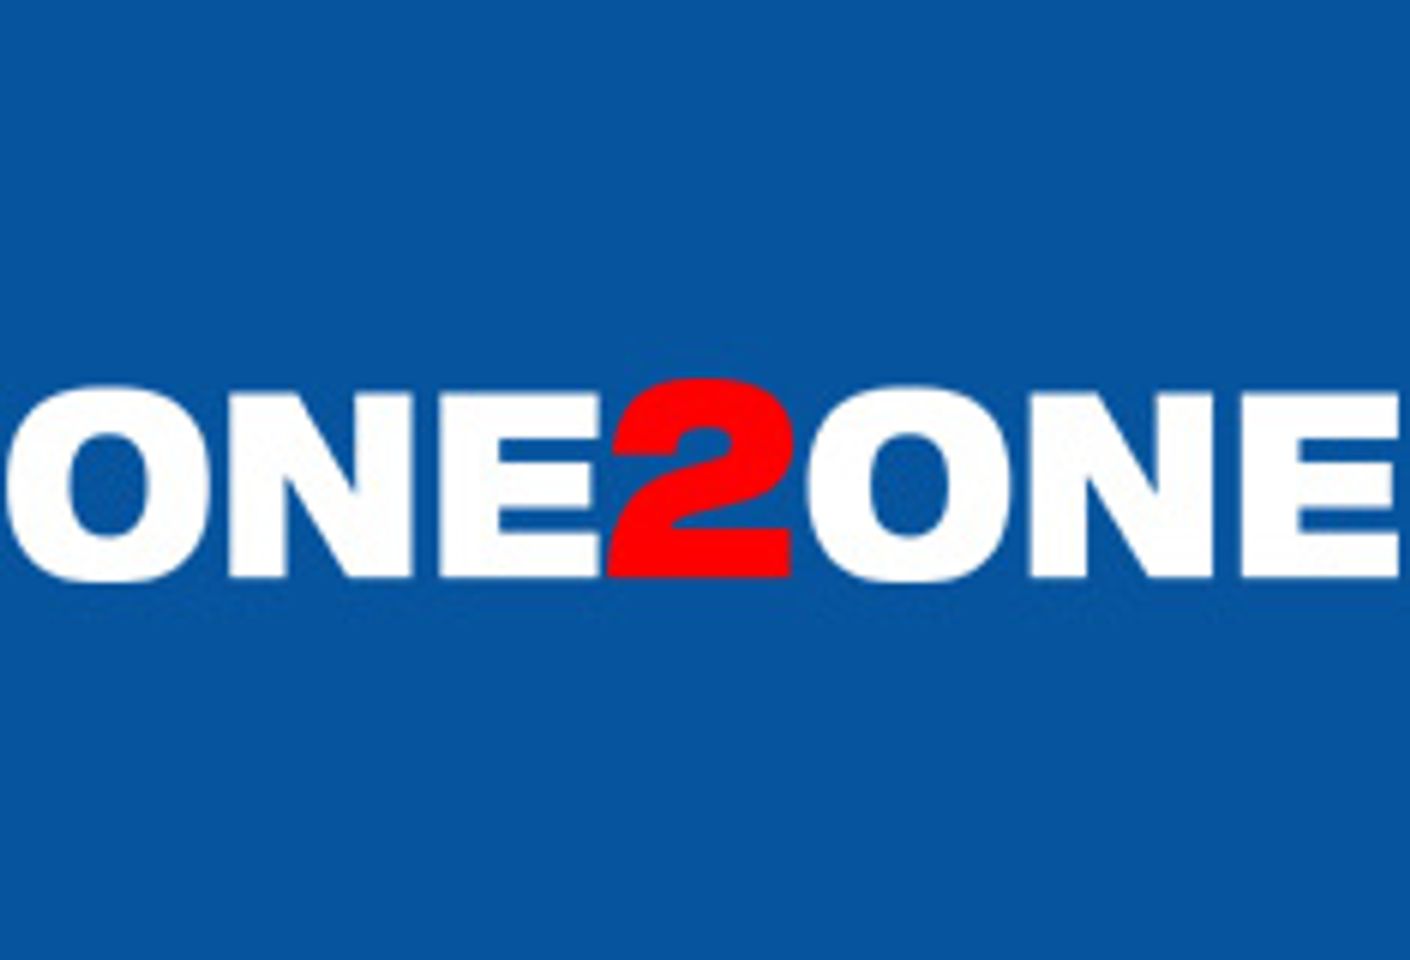 One2one.com Moving Out, In And Up